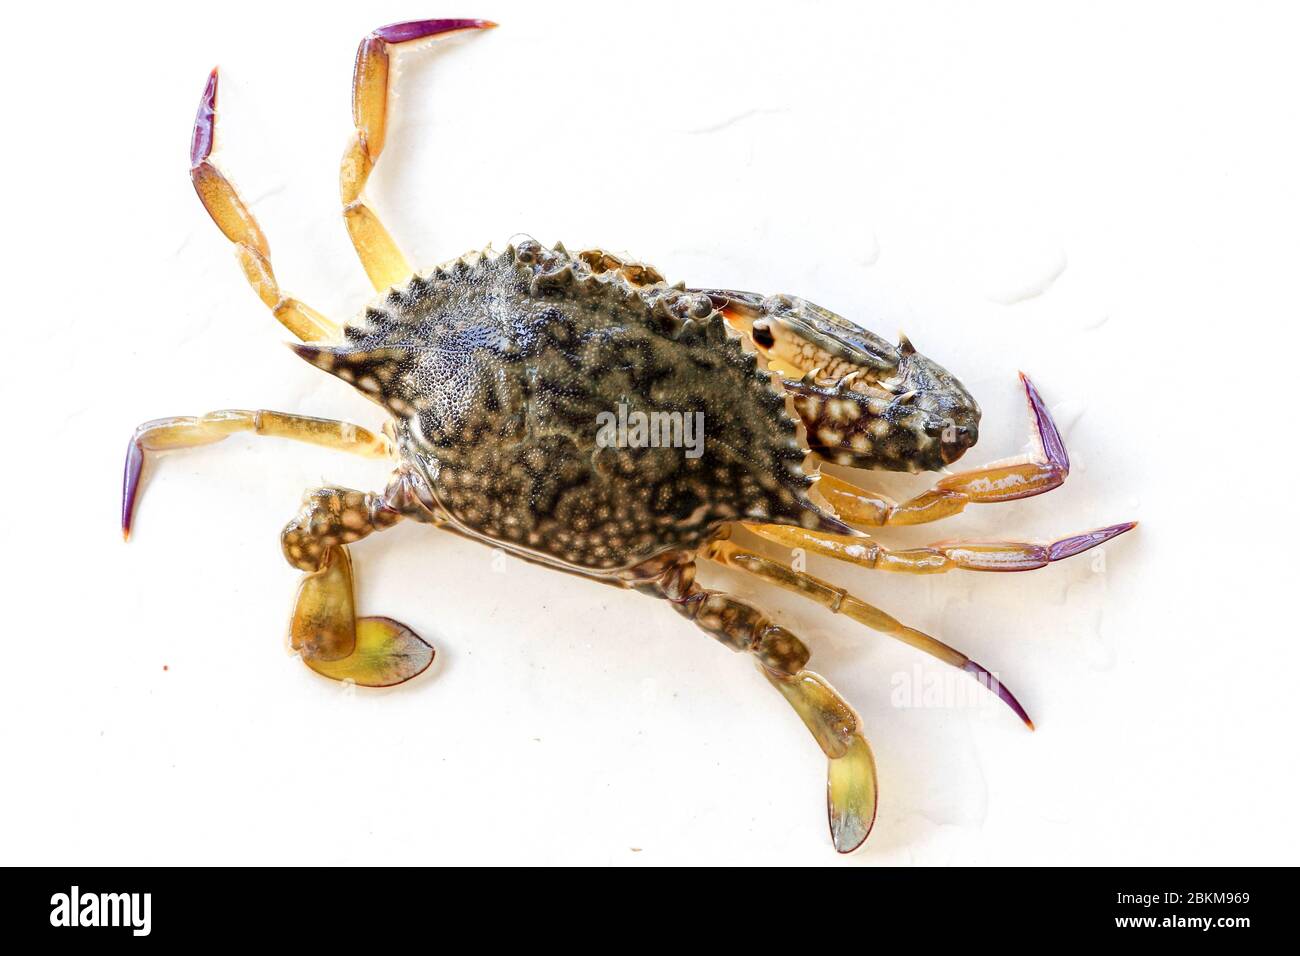 Dorsal view of Blue Manna crab, Sand crab. Flower crab. Portunus pelagicus isolated on a white background. Close-up photo of fresh raw Blue swimming s Stock Photo